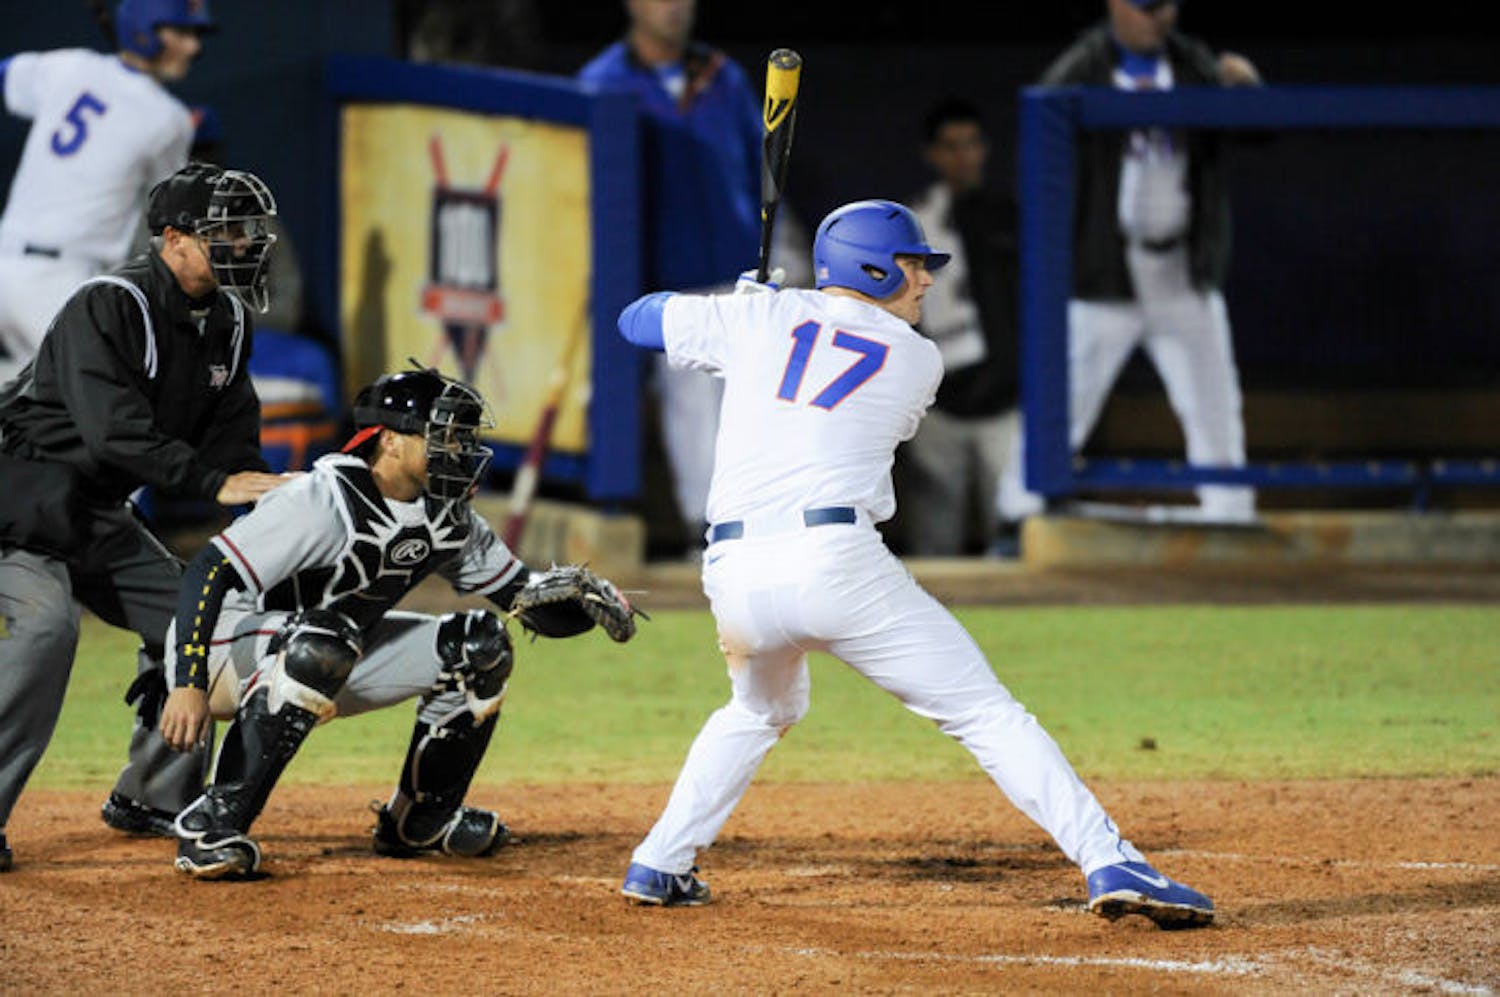 Taylor Gushue bats during Florida’s 4-0 win against Maryland on Feb. 14 at McKethan Stadium. Gushue leads Florida with one home run and nine RBIs through the Gators’ first eight games.